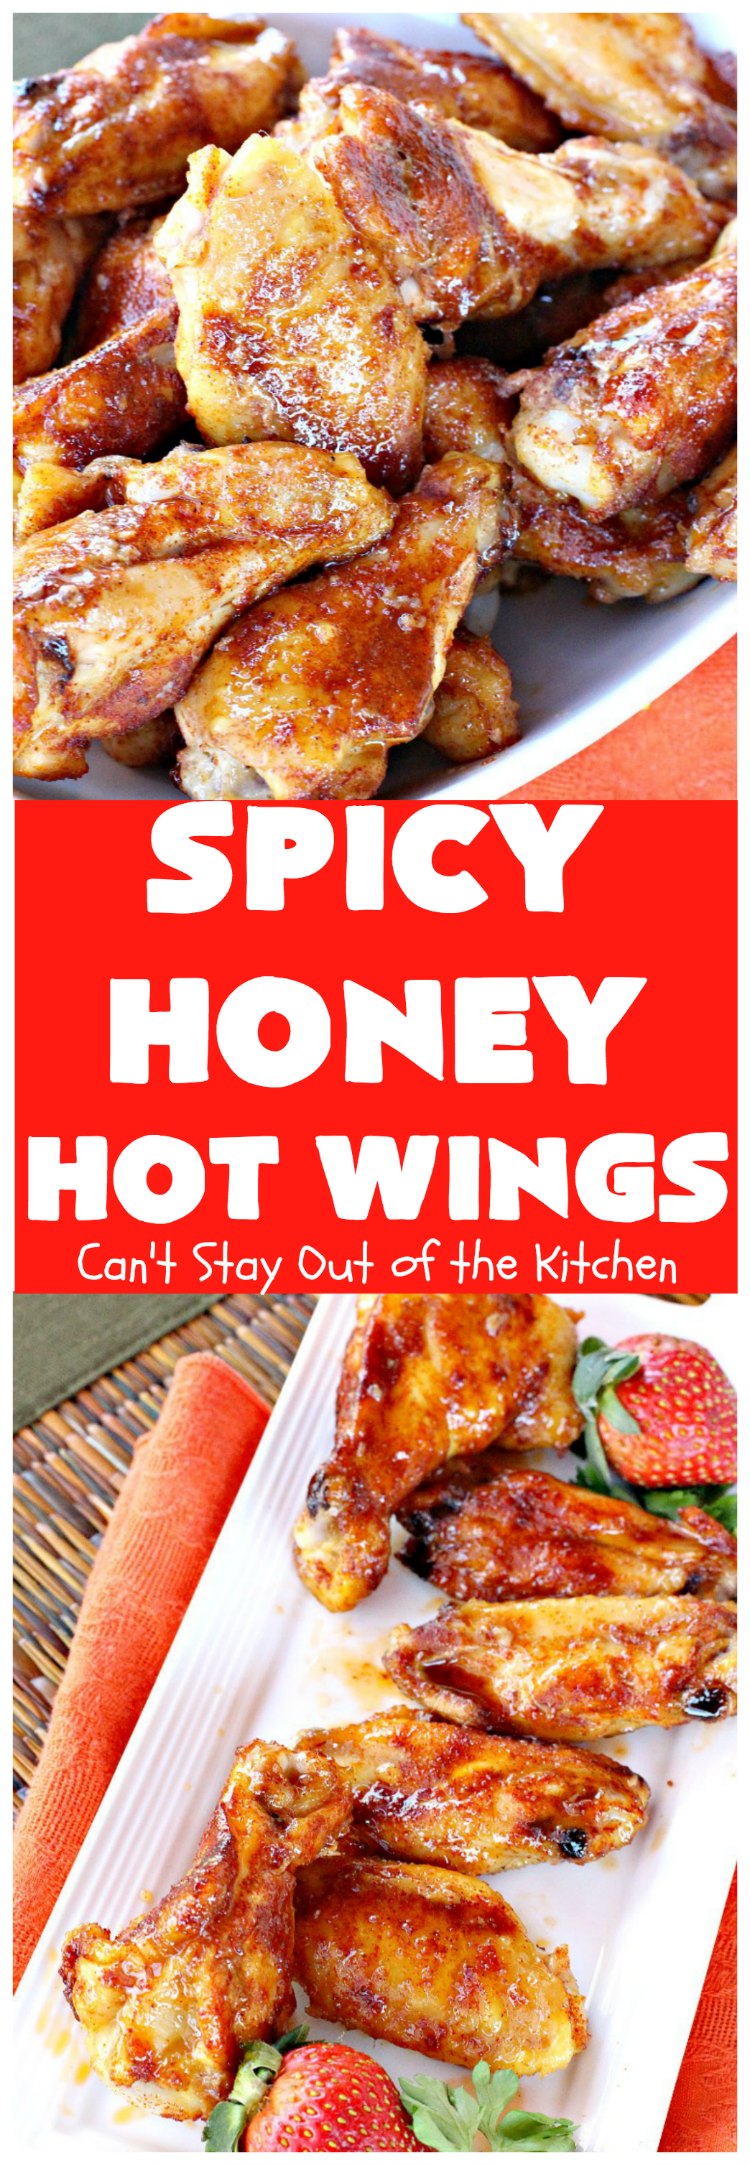 Spicy Honey Hot Wings | Can't Stay Out of the KitchenSpicy Honey Hot Wings | Can't Stay Out of the Kitchen